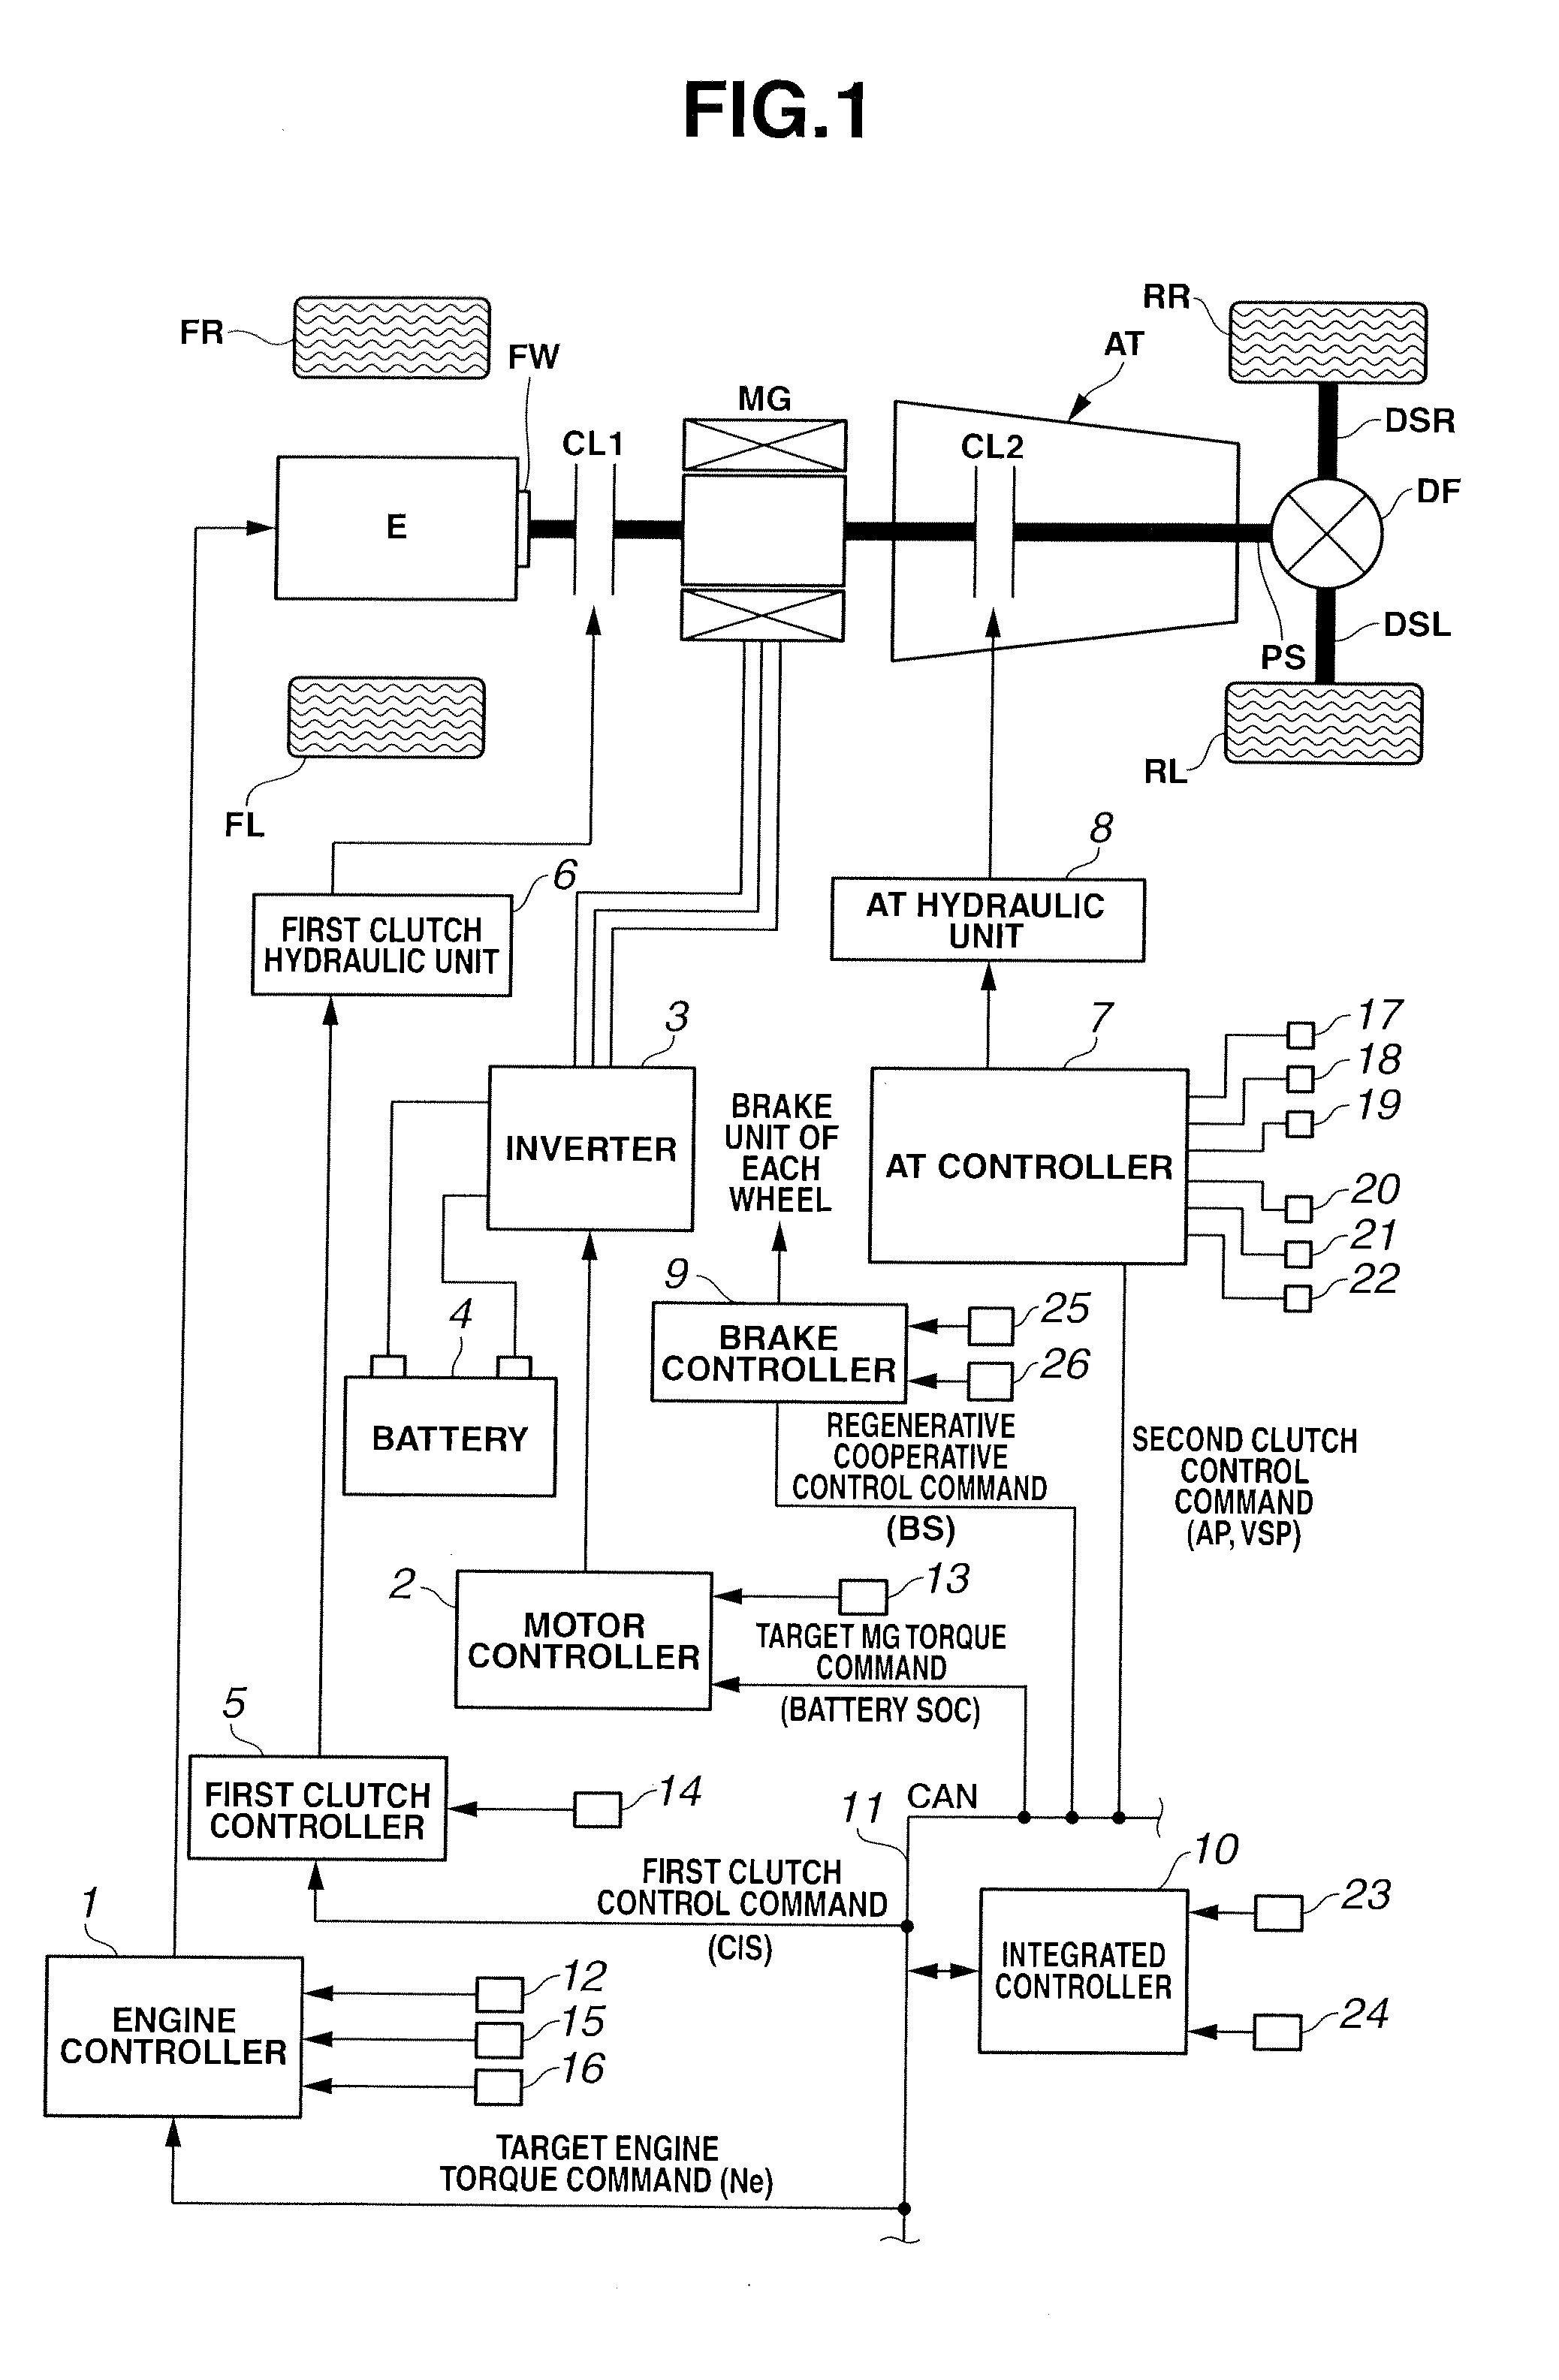 Hydraulic control apparatus for vehicle